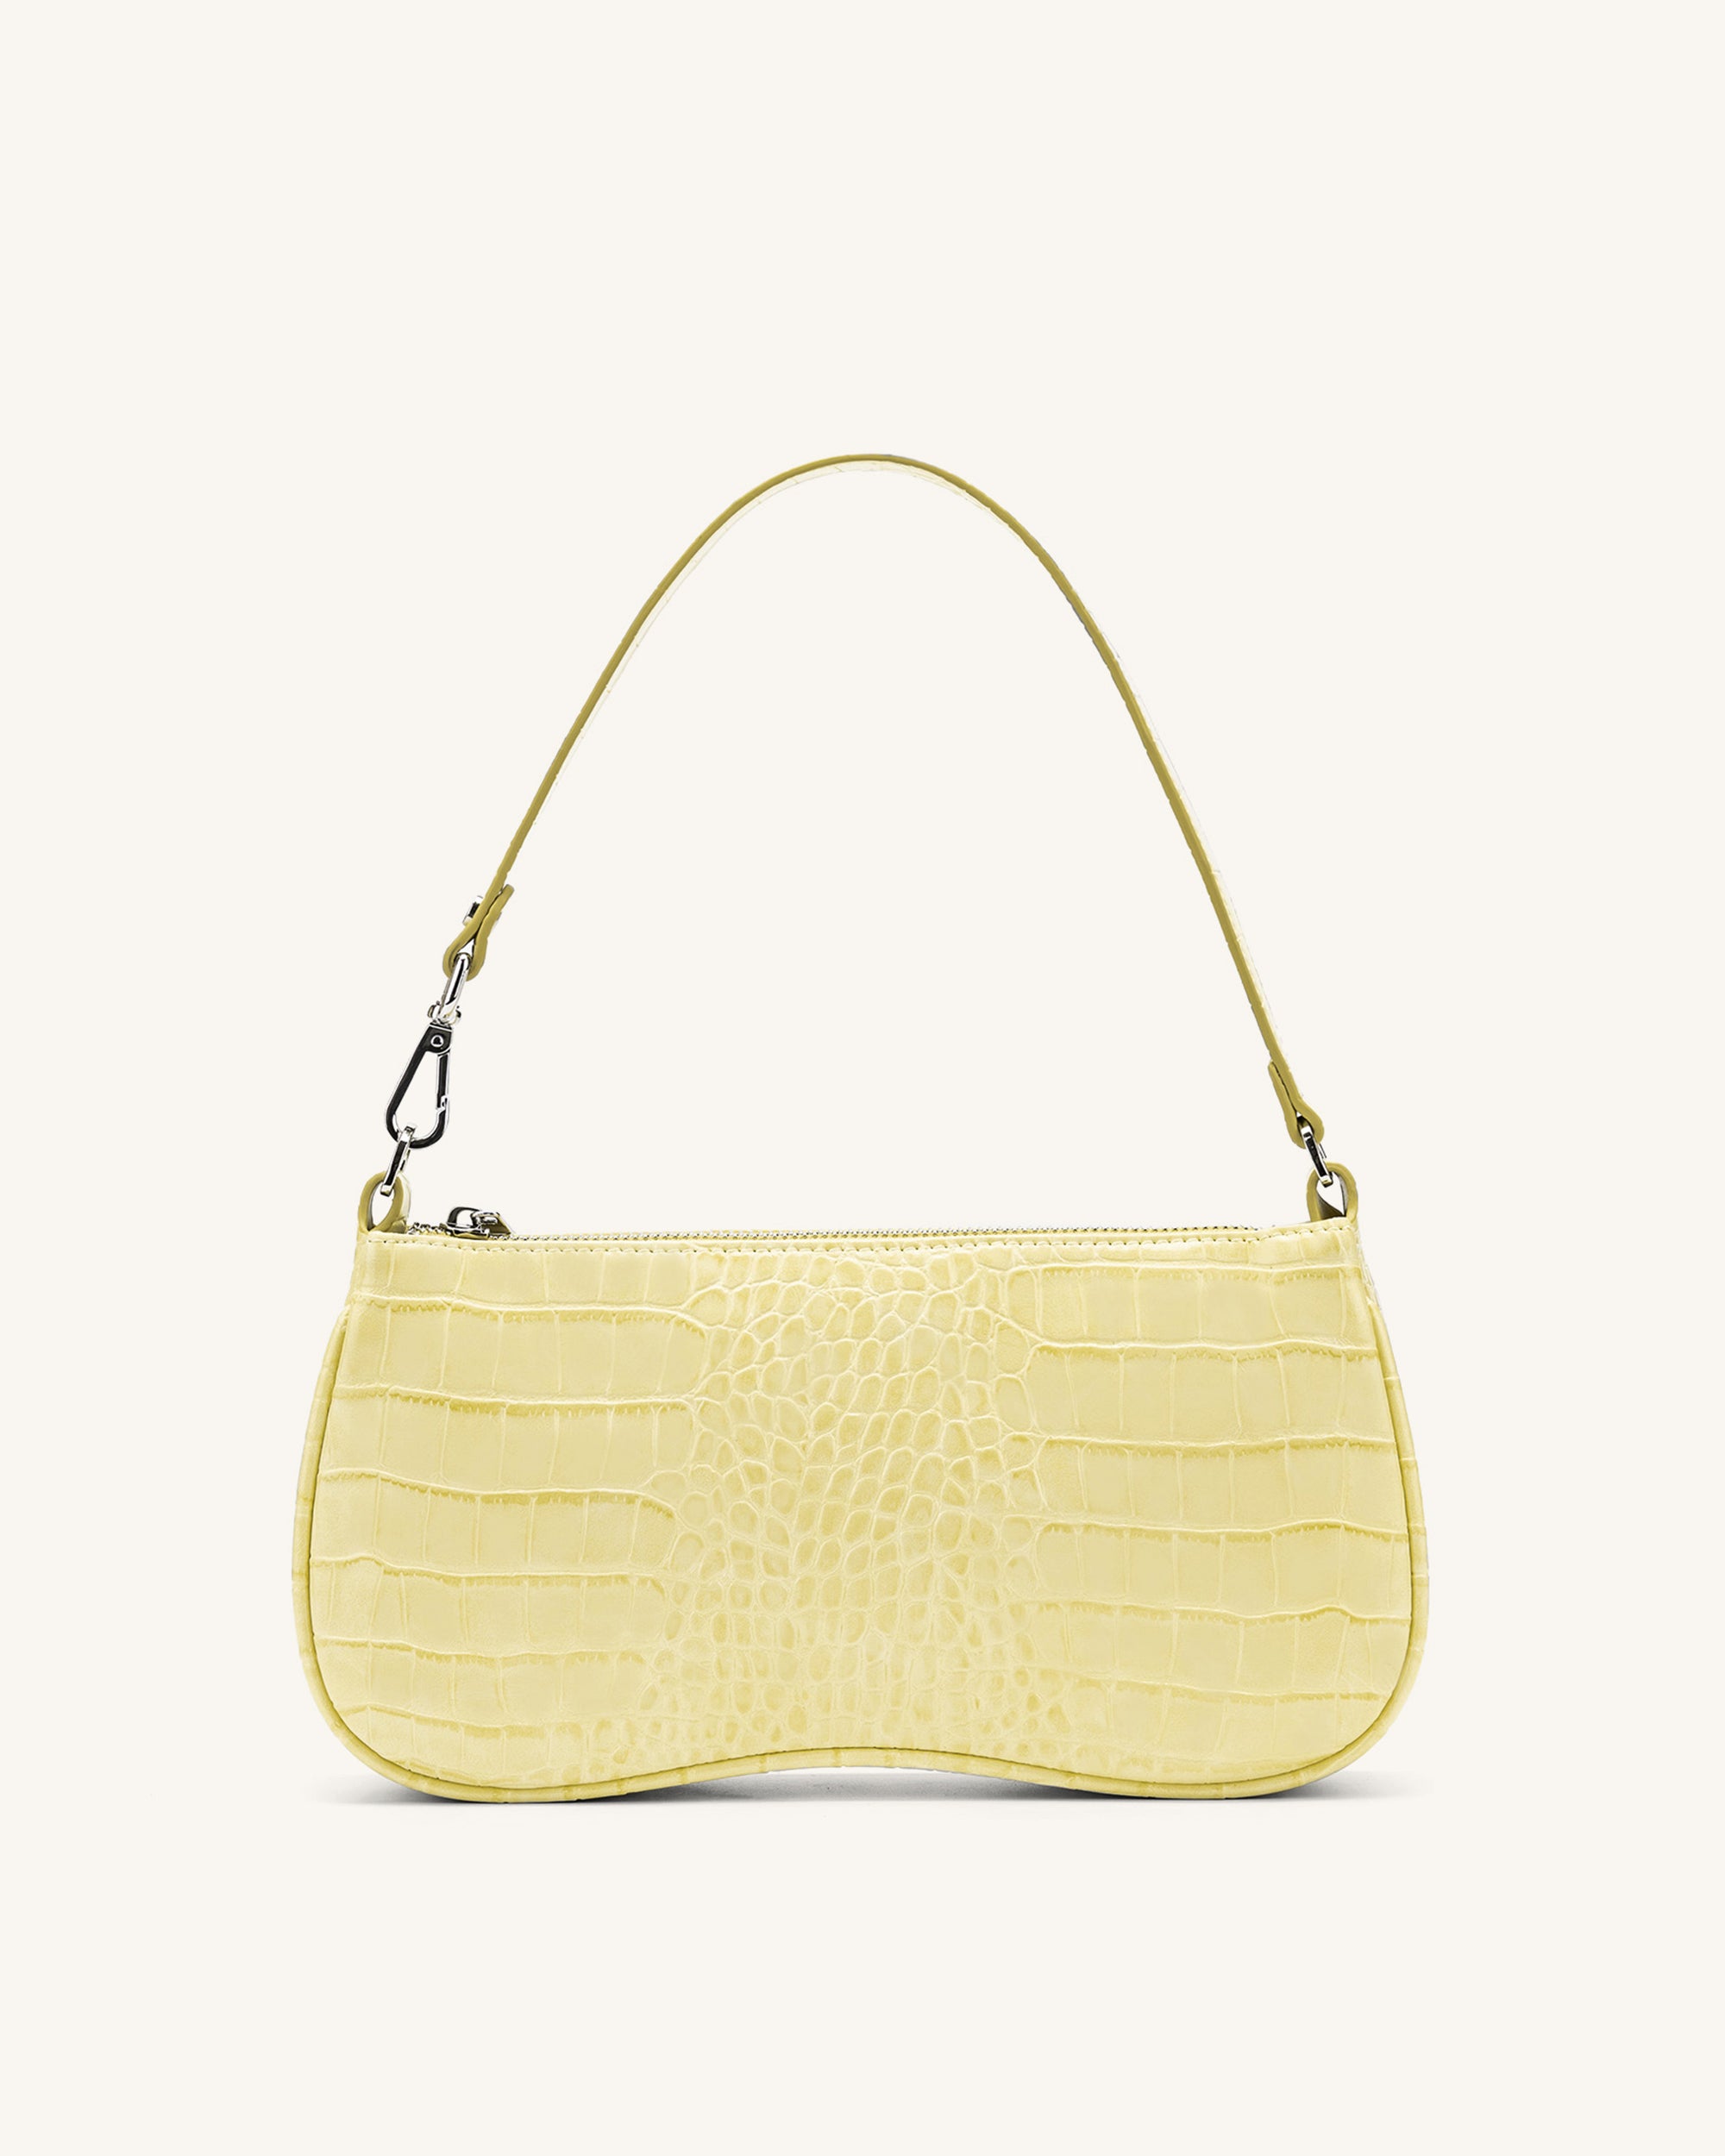 Kate Spade Yellow Purse/Clutch | Vinted